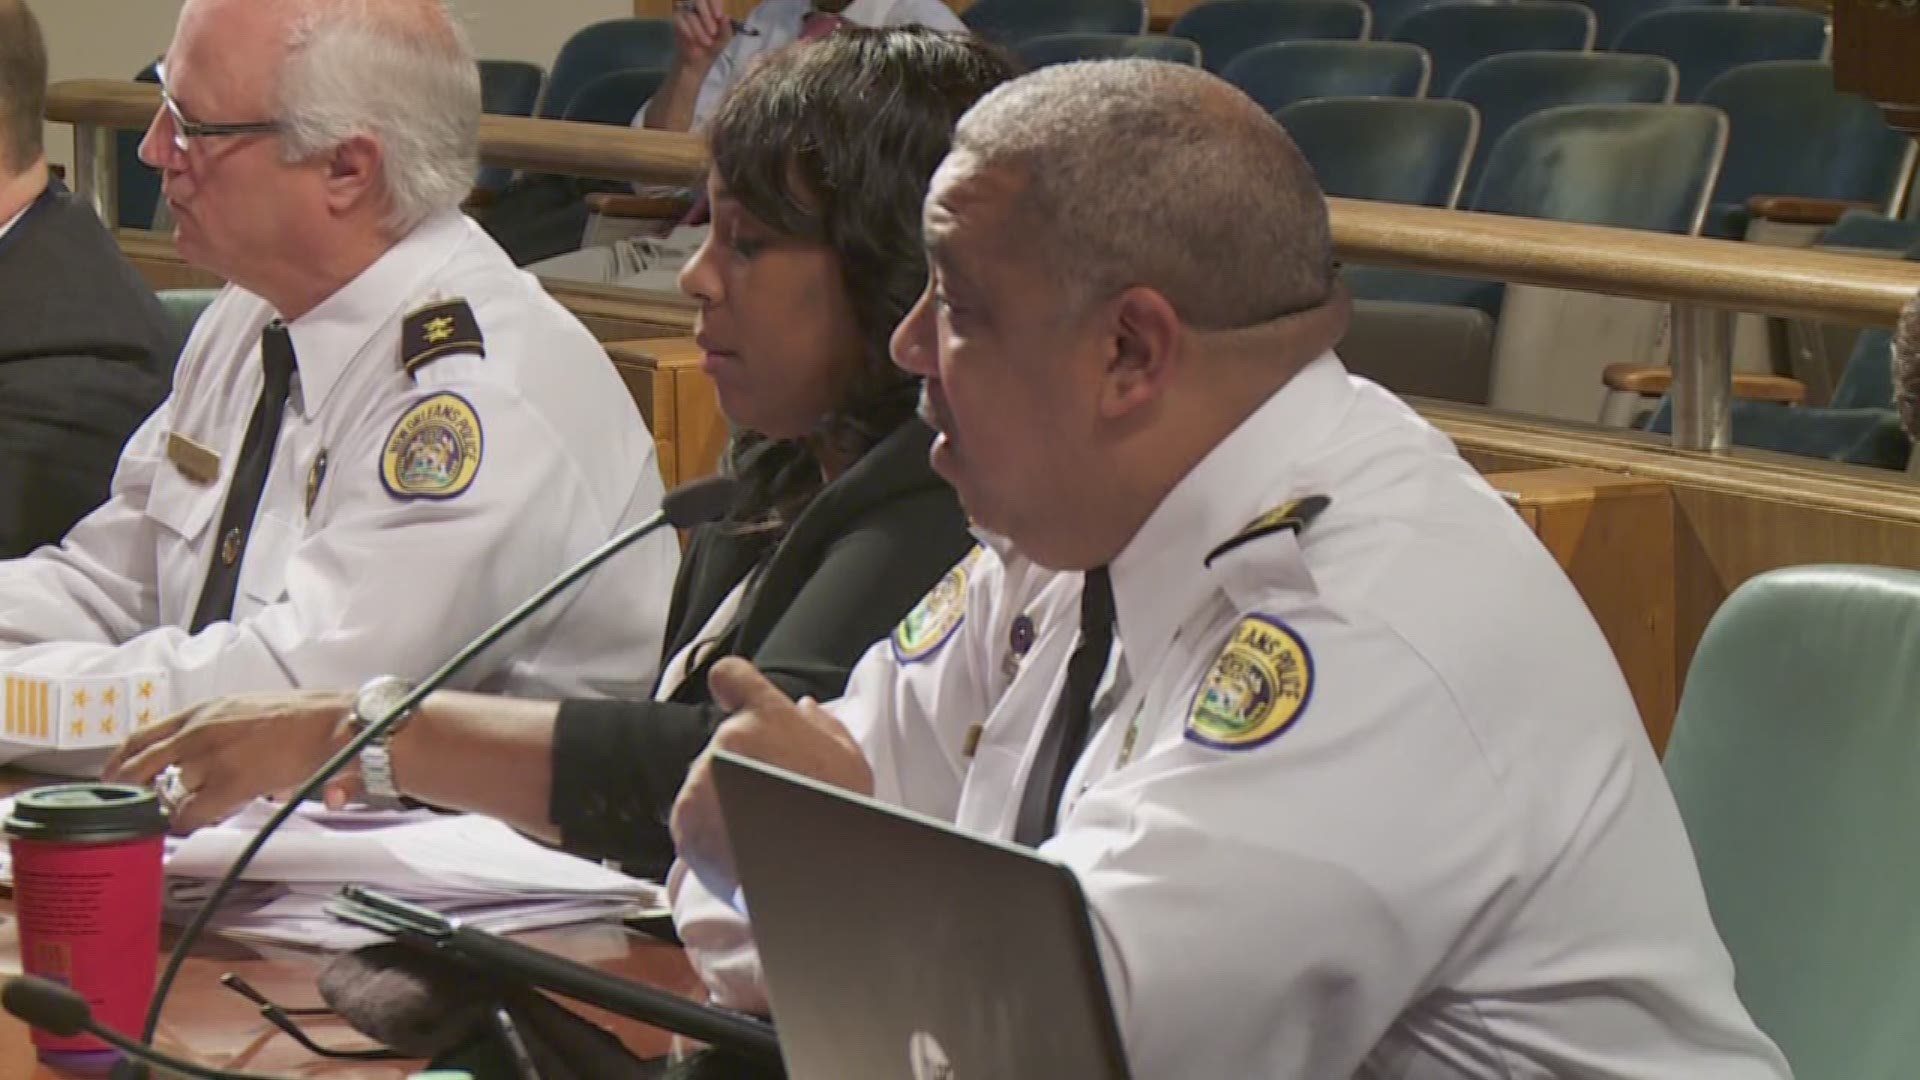 NOPD chief addresses 'unfounded' call problems